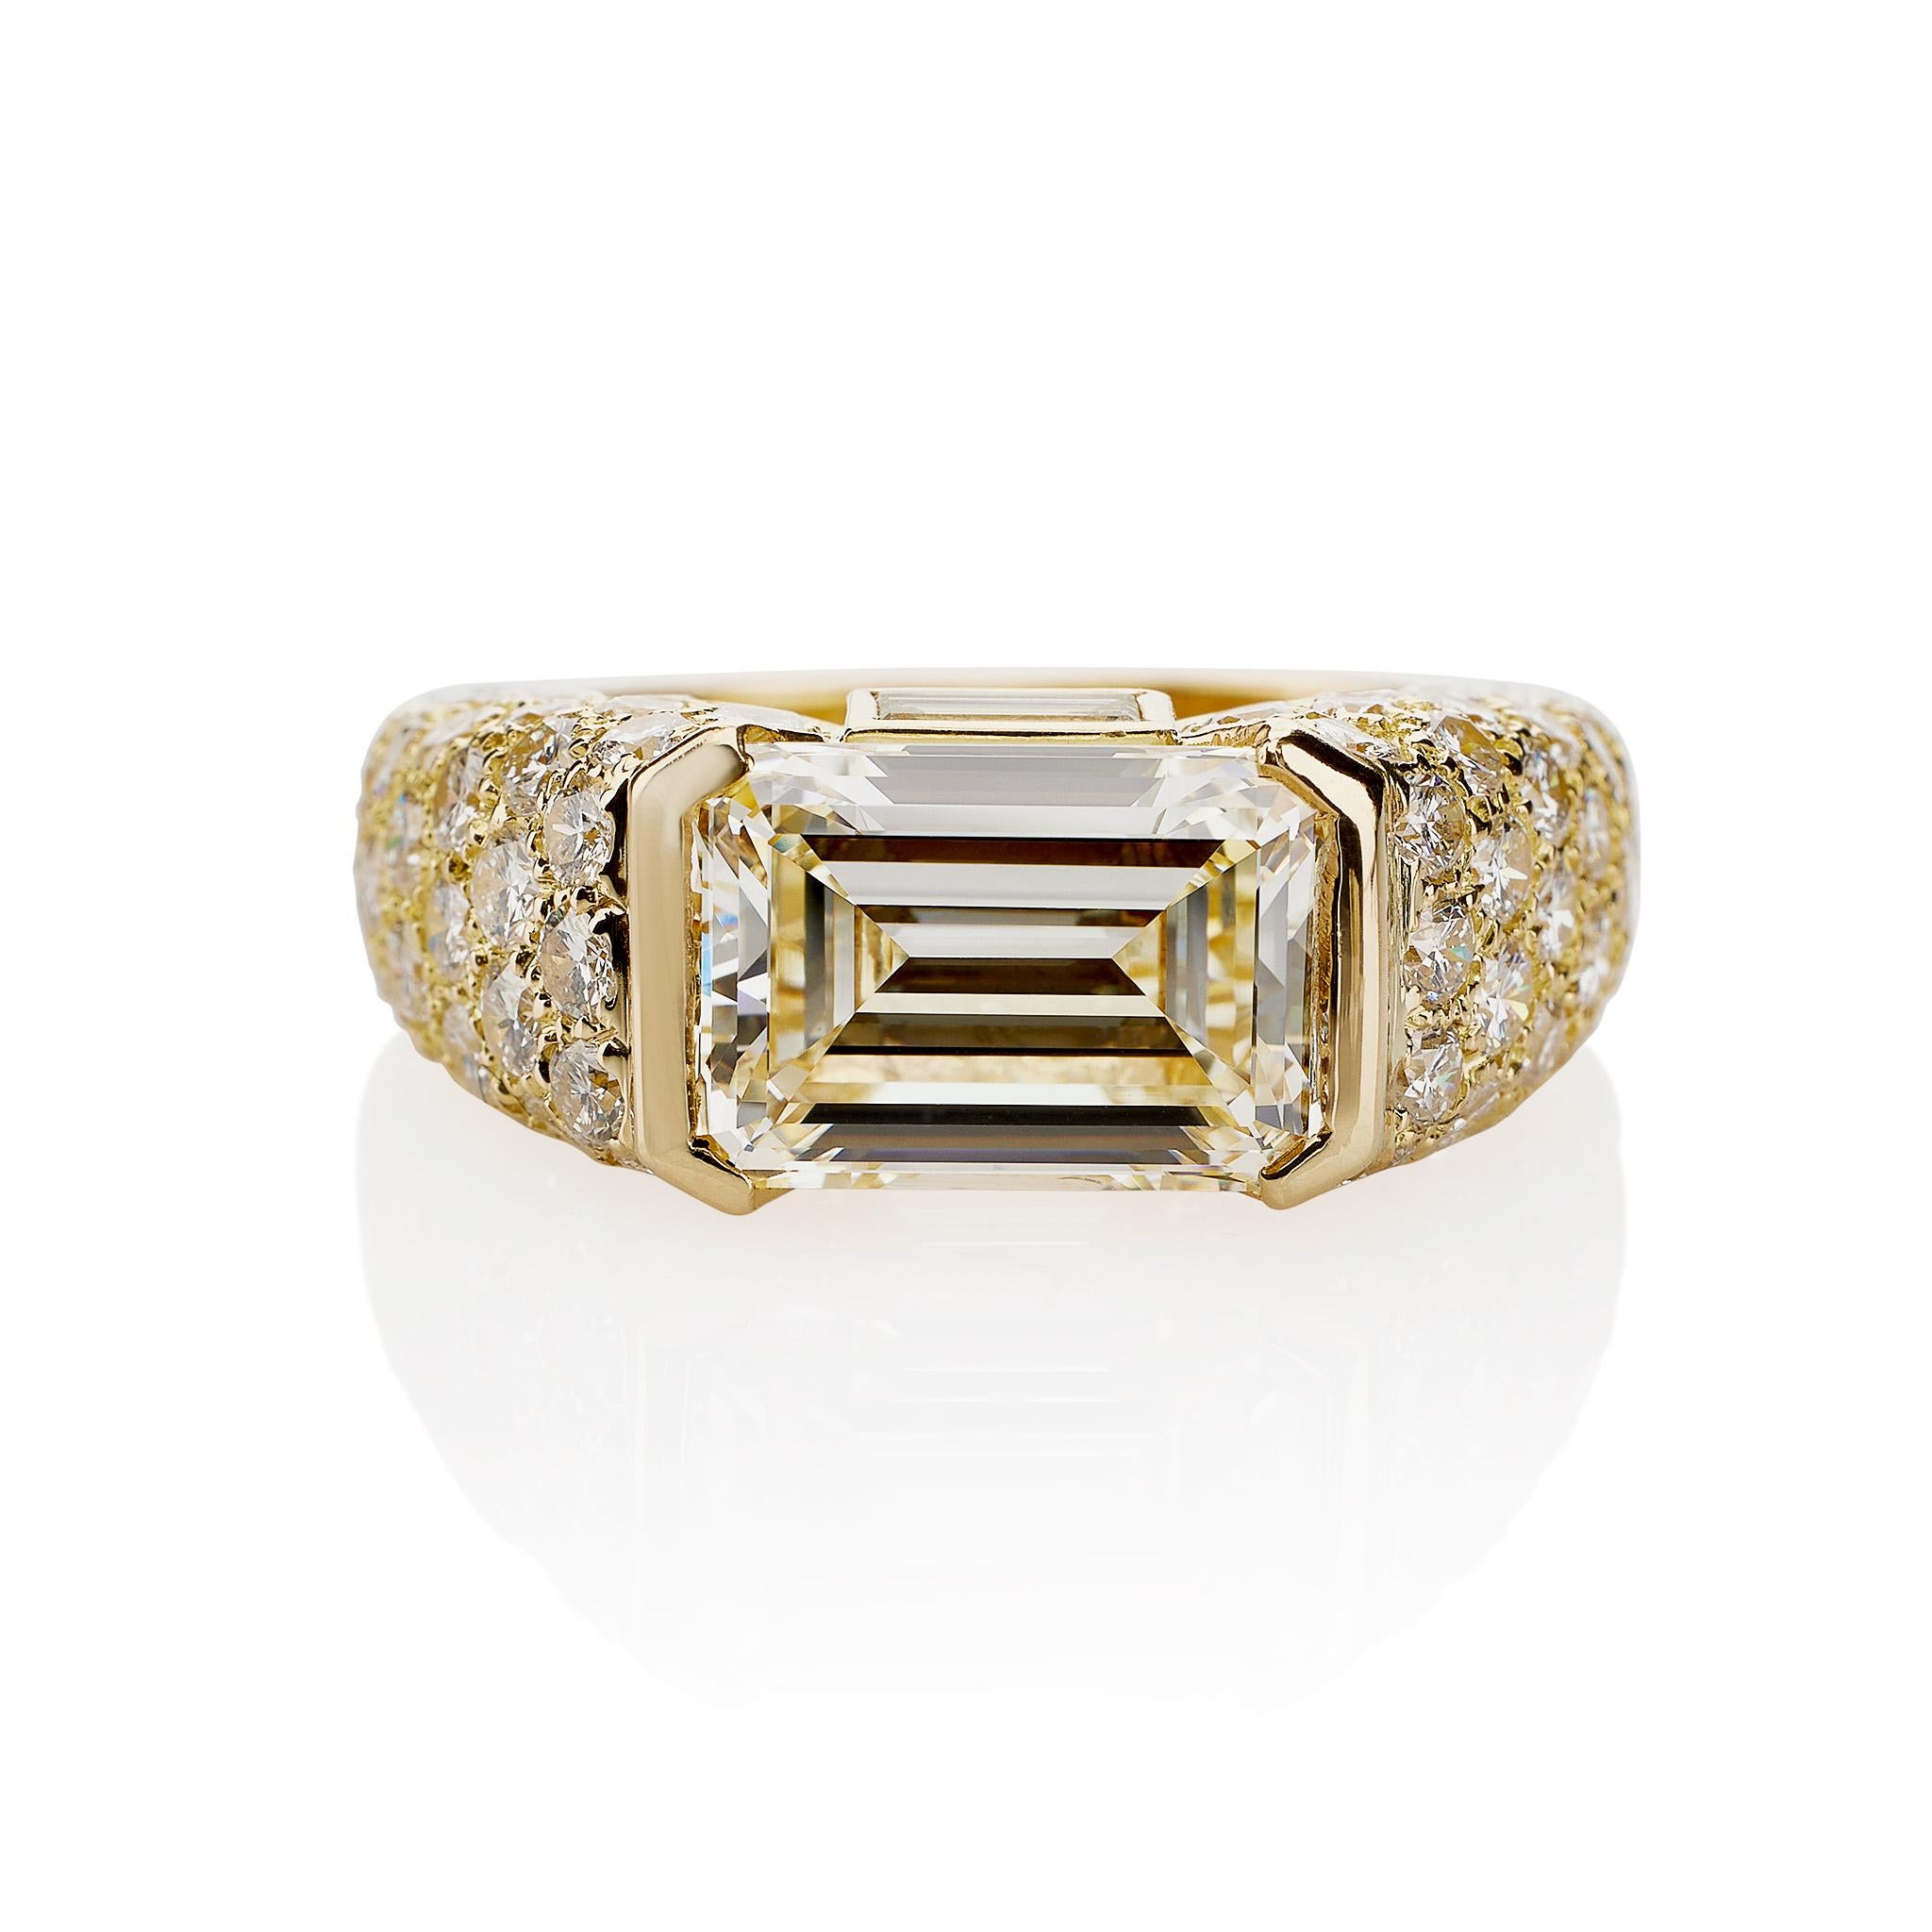 This Cartier Monture Paris ring set with an emerald-cut diamond with GIA report L color, VVS2 clarity, is mounted in 18K gold. The 4.93 carat diamond is mounted horizontally, its shoulders pavé-set with diamond melêe, and vertically flanked by